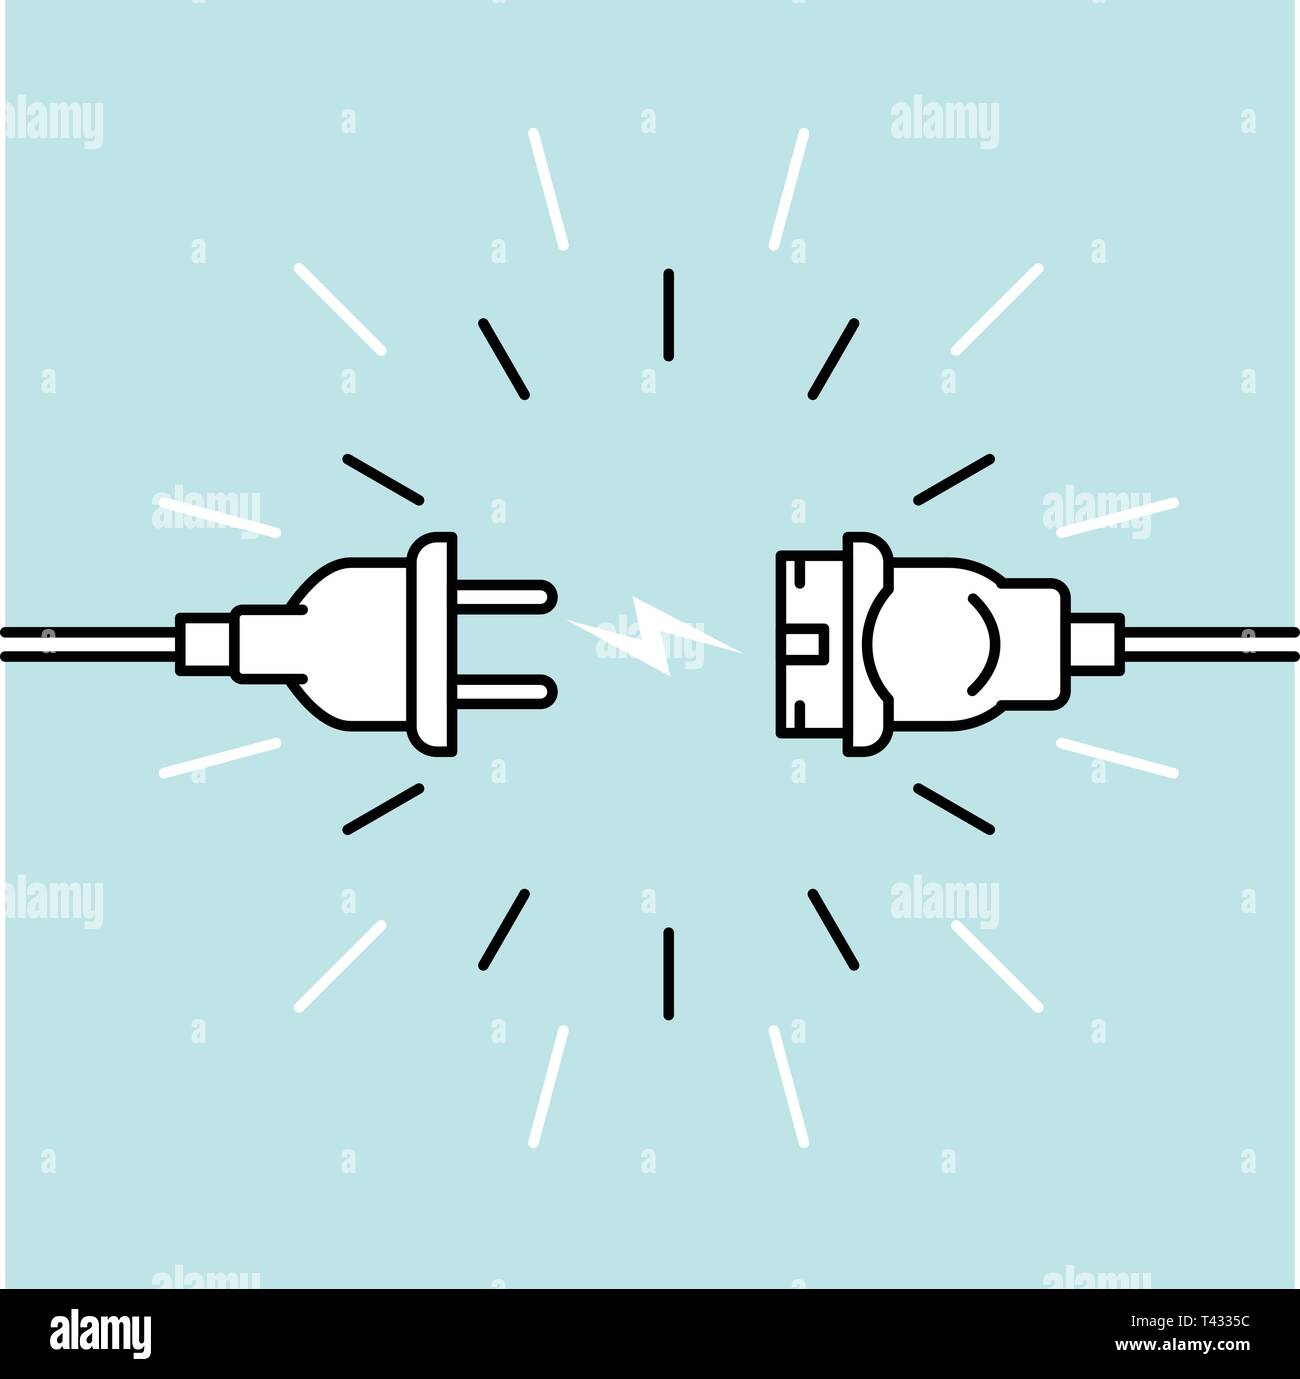 Unplugged electric plug and socket  - 404 error, disconnection, loss of connect, bond opening Stock Vector